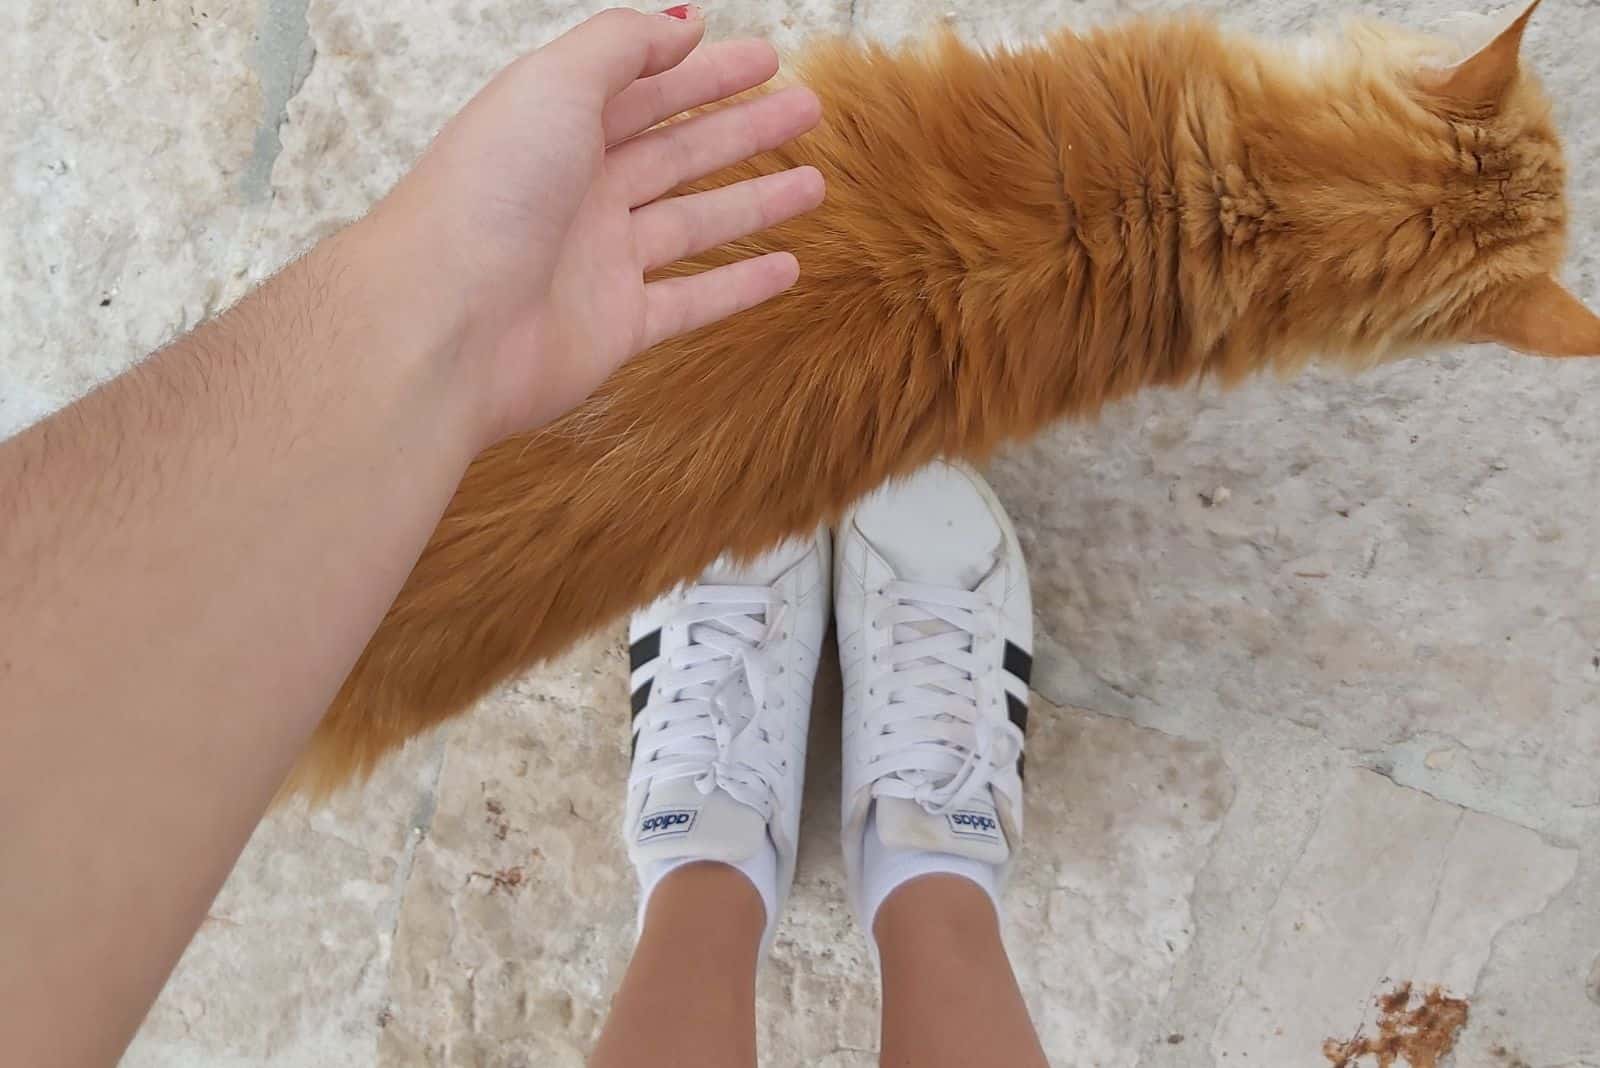 a yellow cat walks by the girl's feet